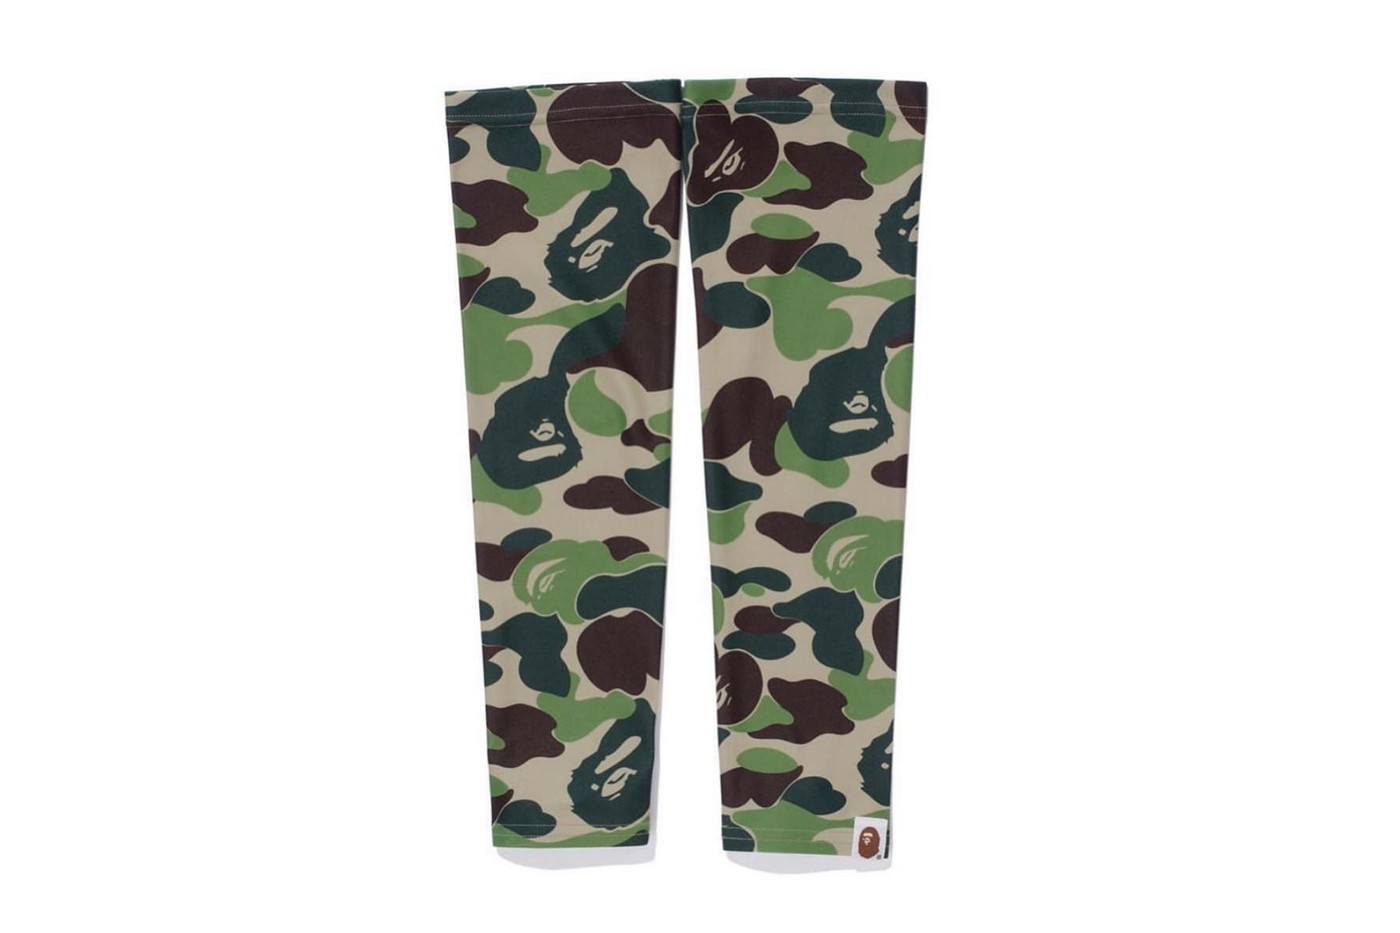 BAPE Keeps Things Wavy This Summer With ABC CAMO Durags